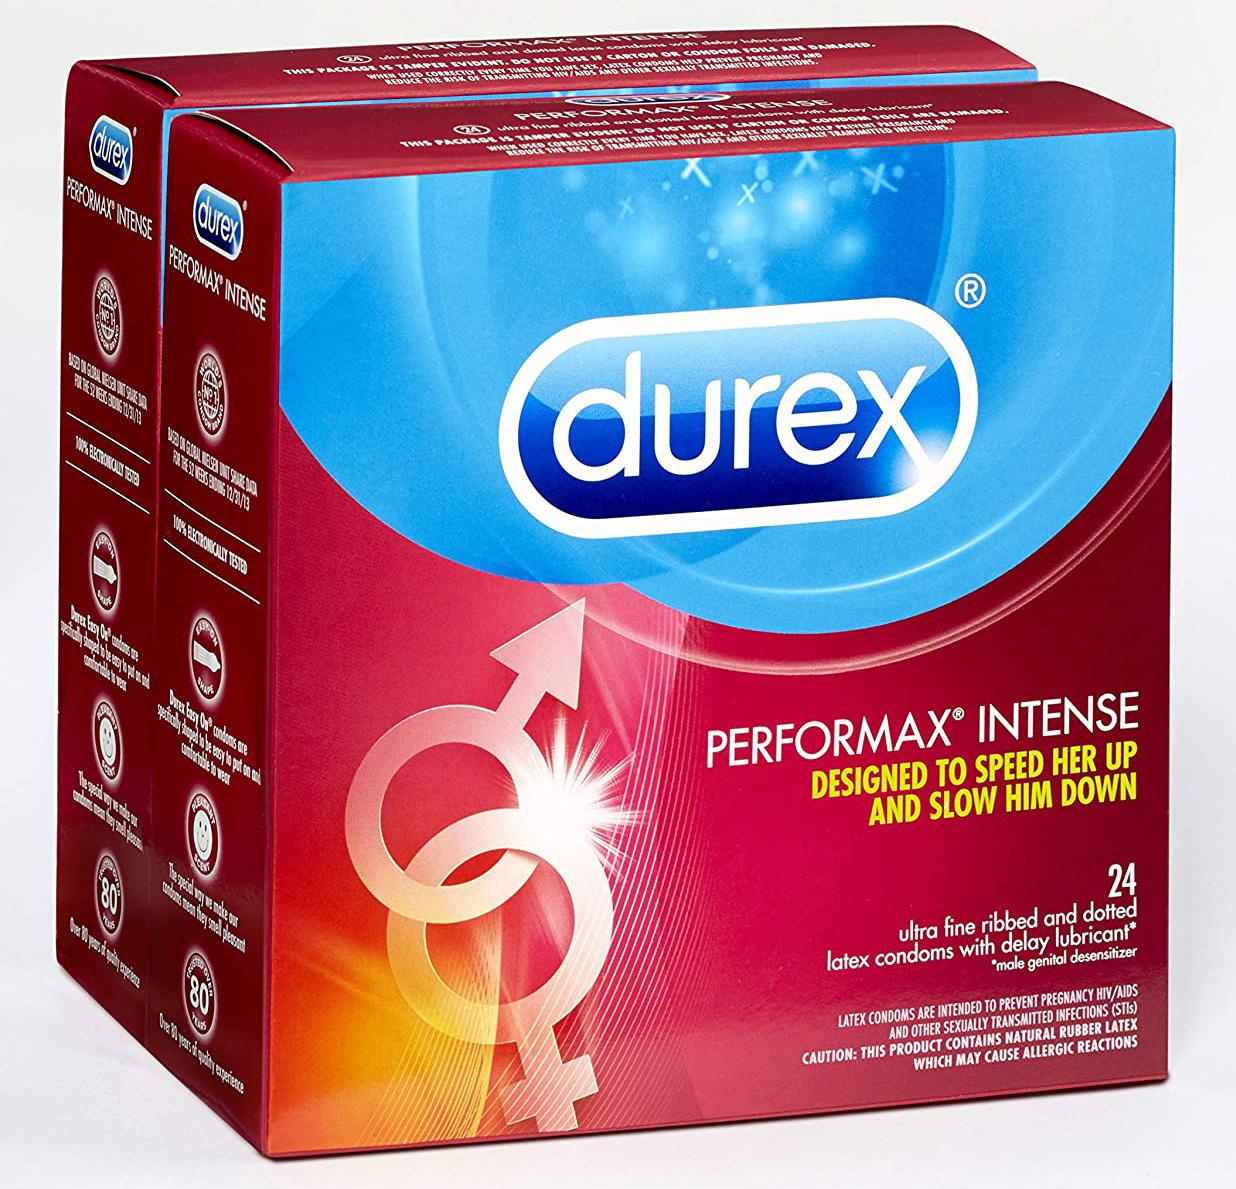 48 Durex Performax Intense Natural Rubber Latex Condoms for $17.07 Shipped